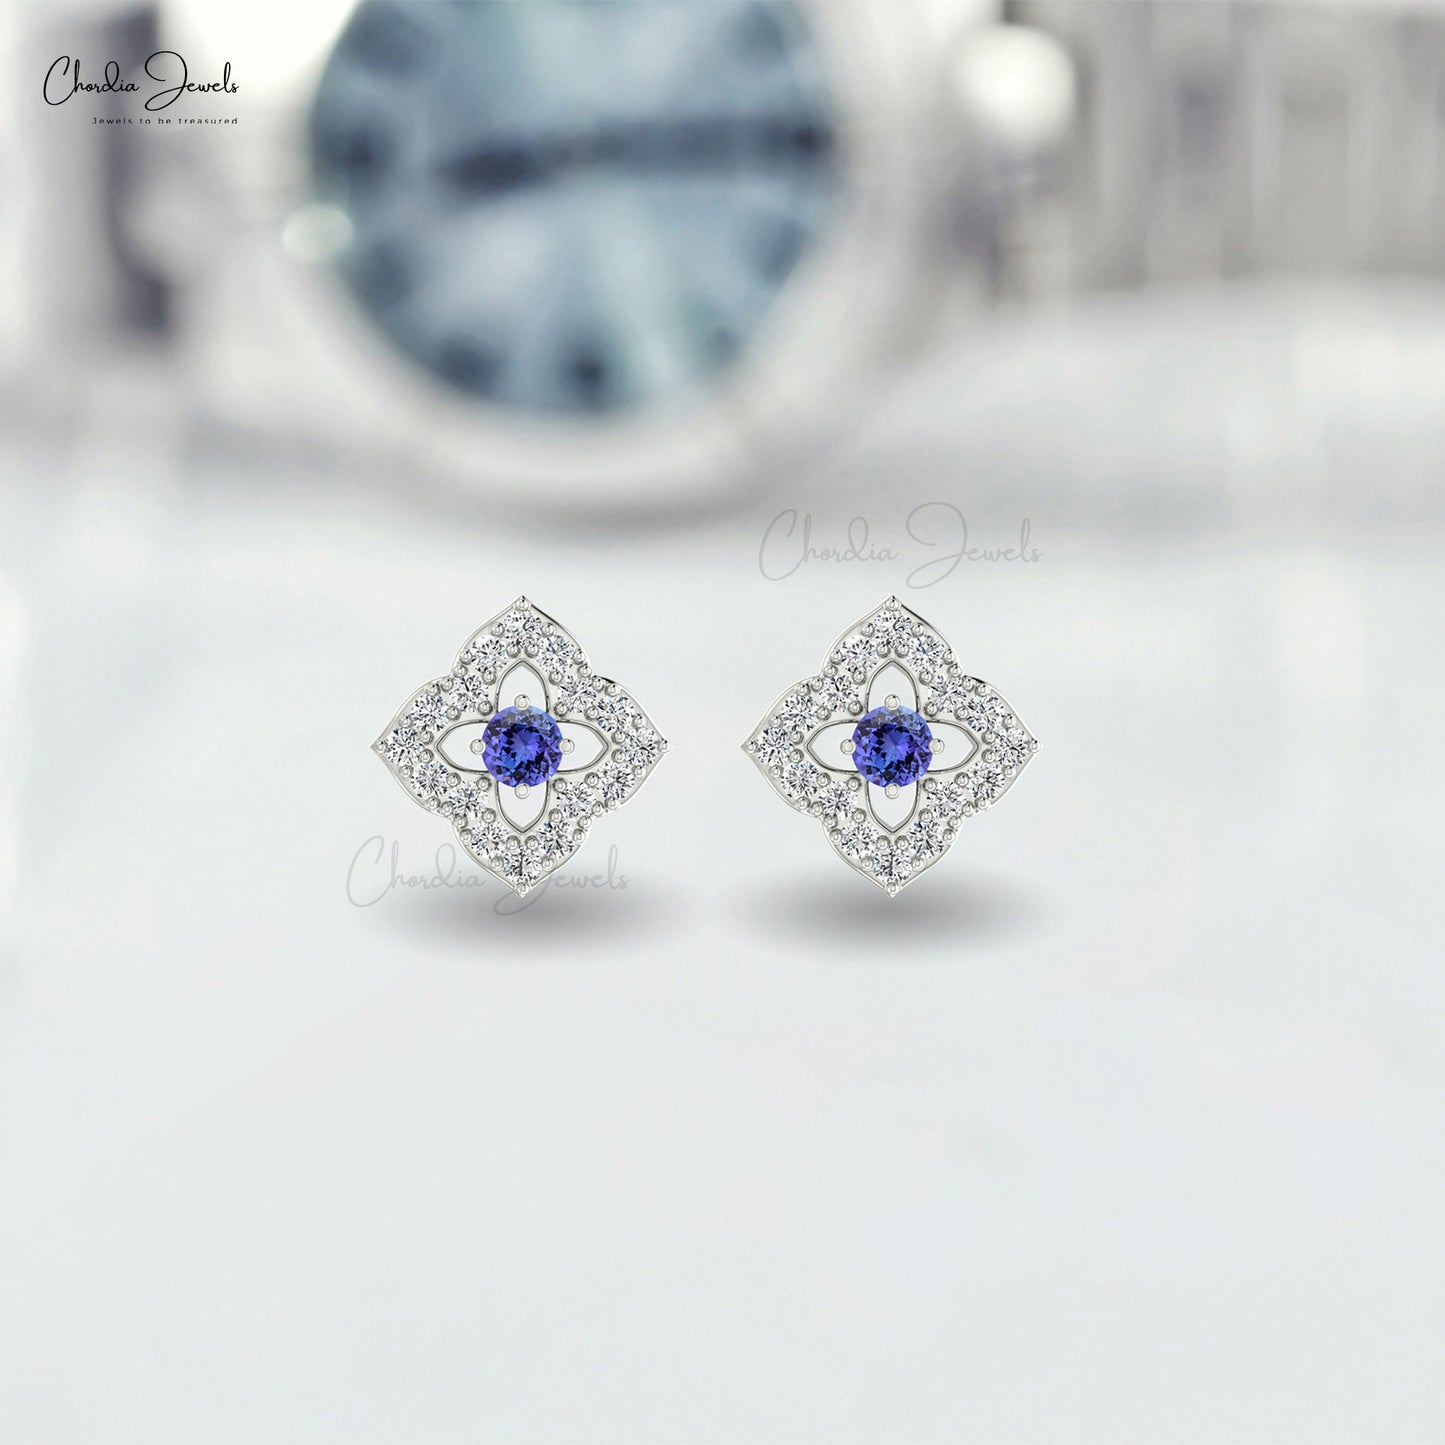 Load image into Gallery viewer, Real 14k Gold 0.10 Ct White Diamond Floral Studs For Wedding 2mm Round Cut December Birthstone Natural Tanzanite Minimalist Stud Earrings Jewelry
